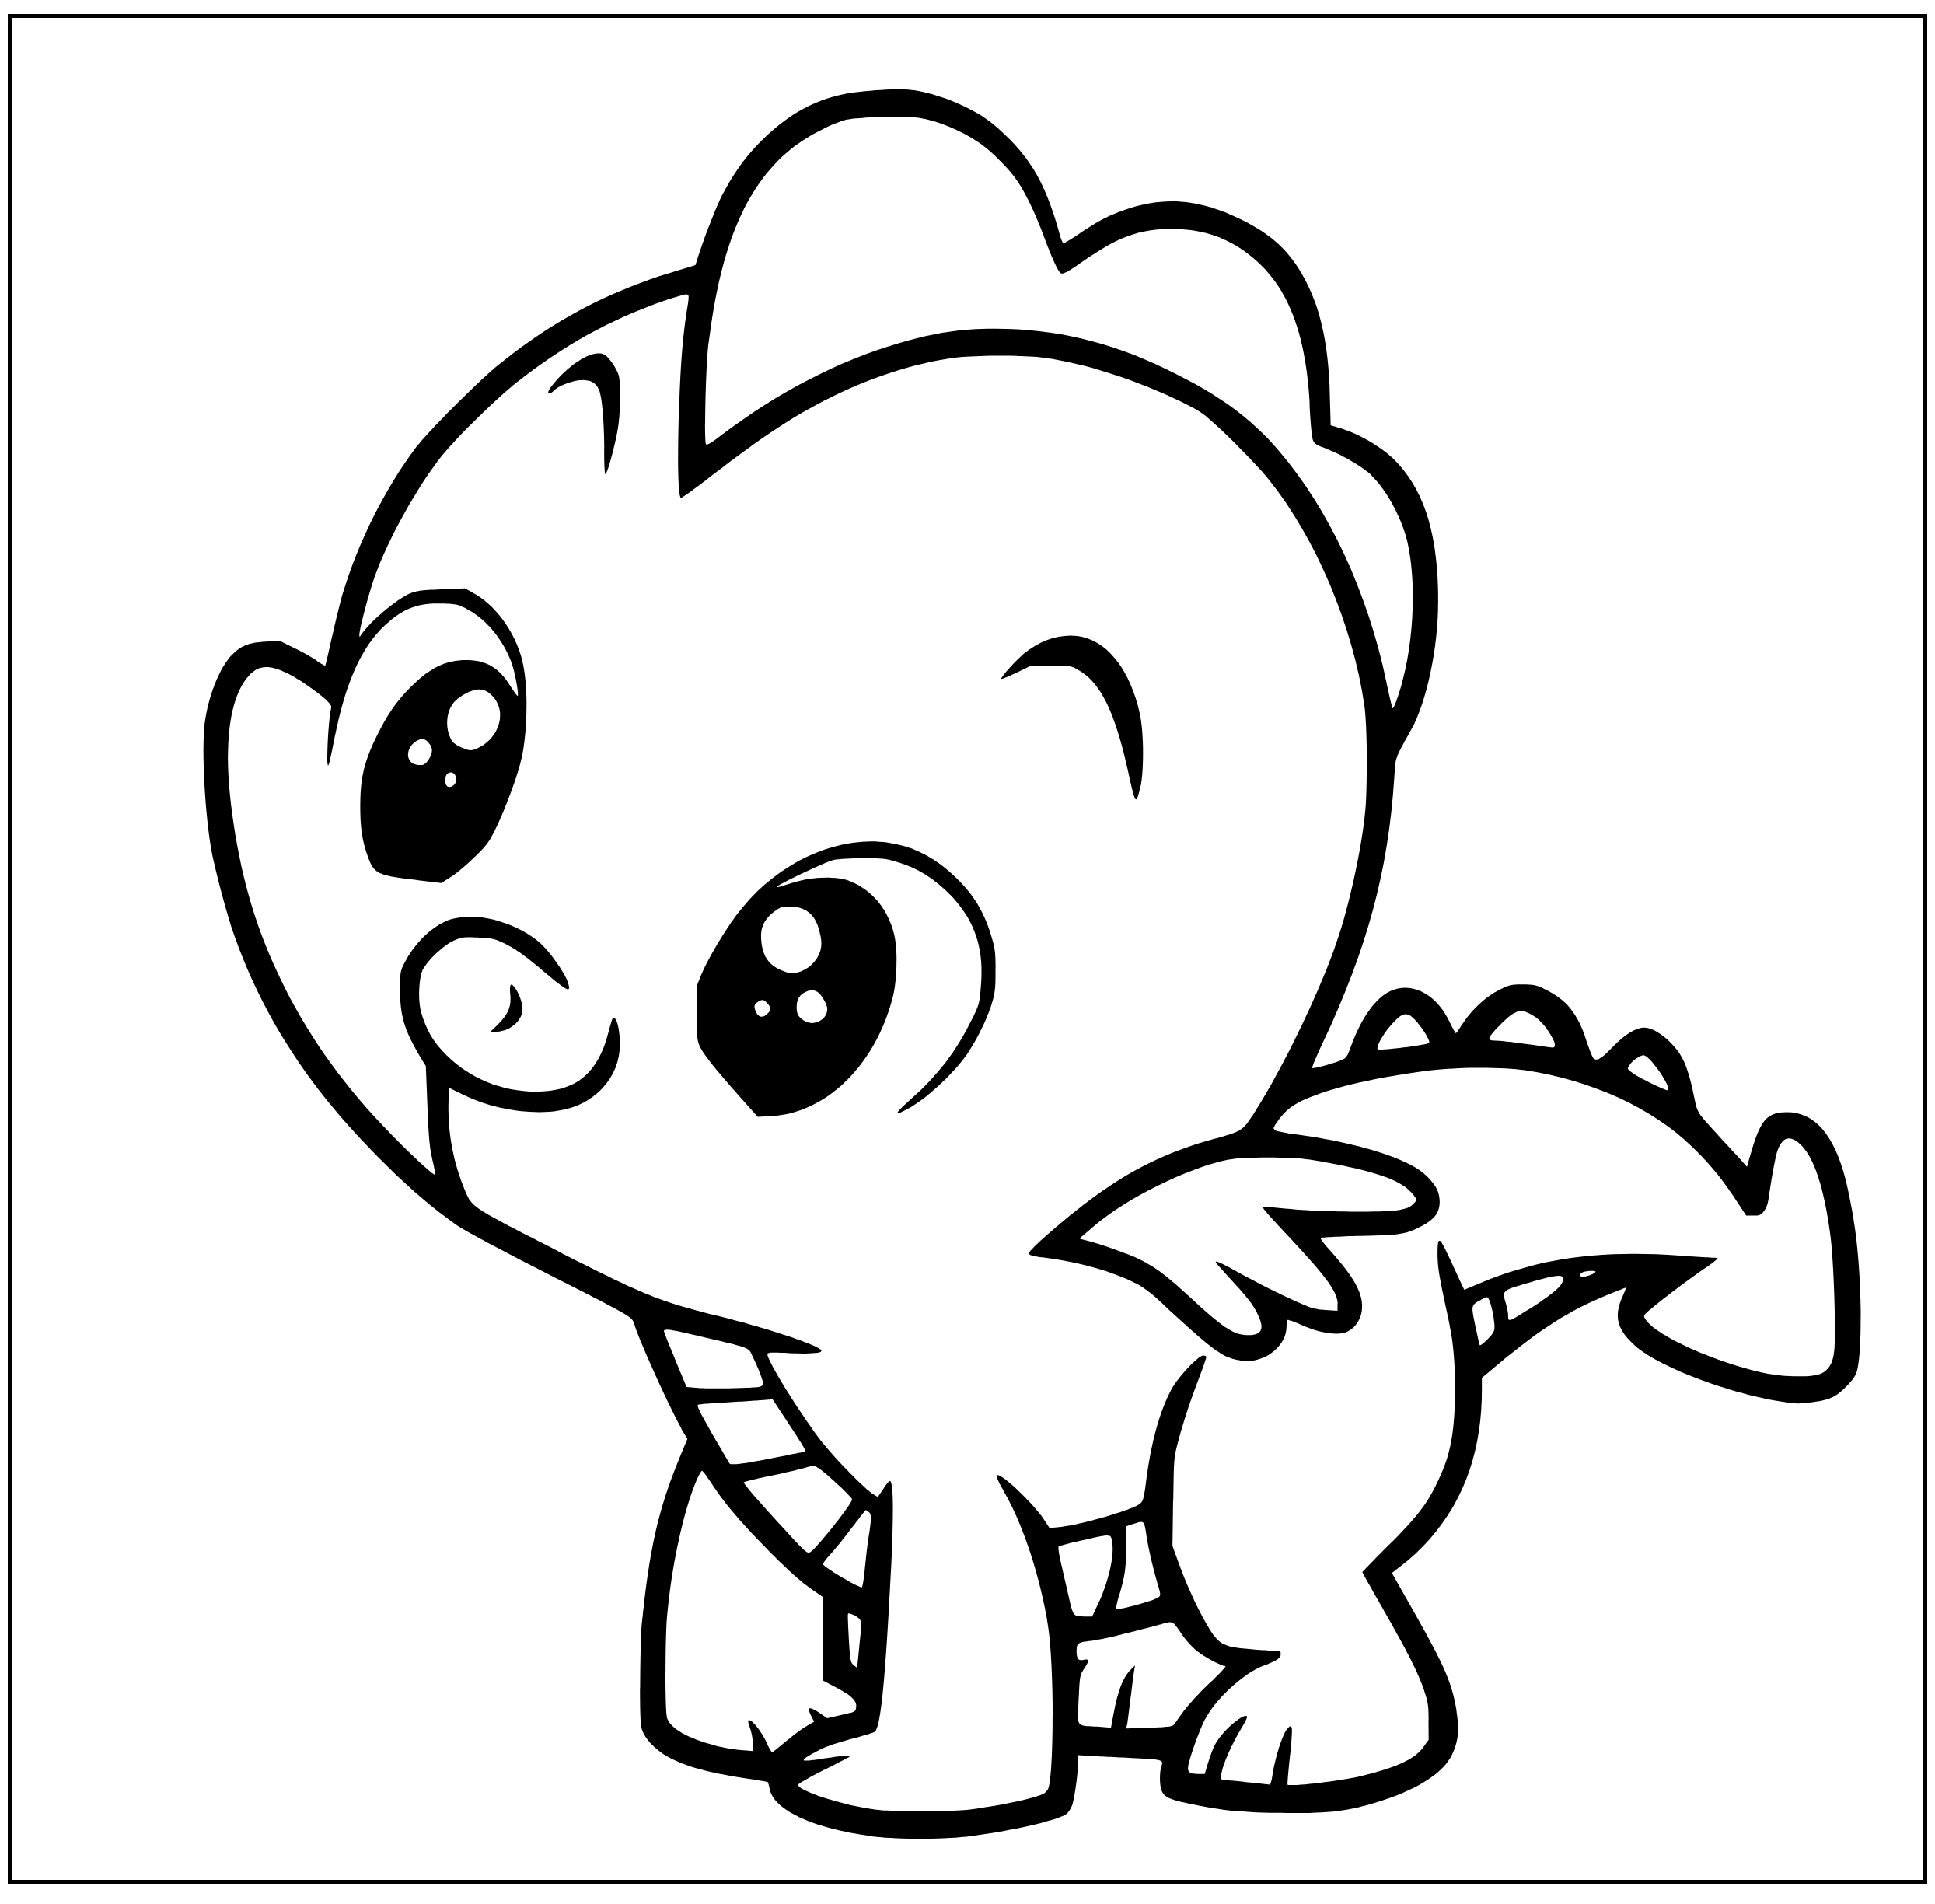 Printable Baby Spike Coloring Page for kids.